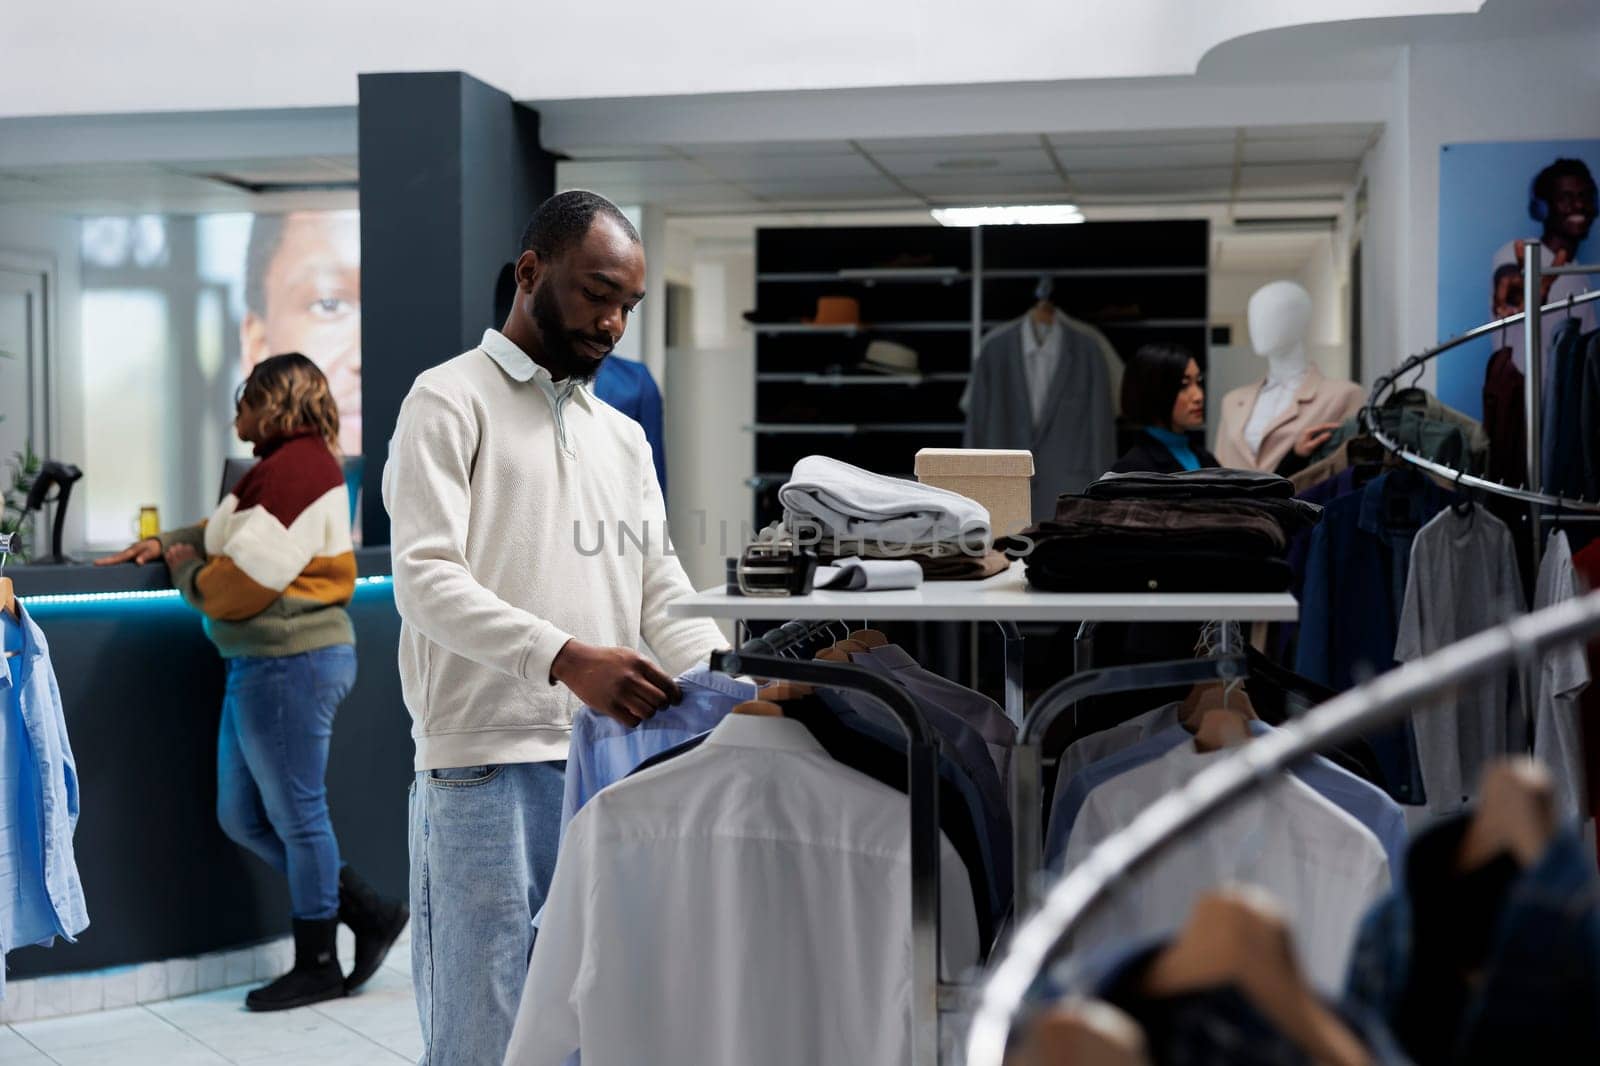 Young african american man shopping for casual apparel and browsing rack with shirts in menswear boutique. Clothing store customer choosing outfit and checking garment style